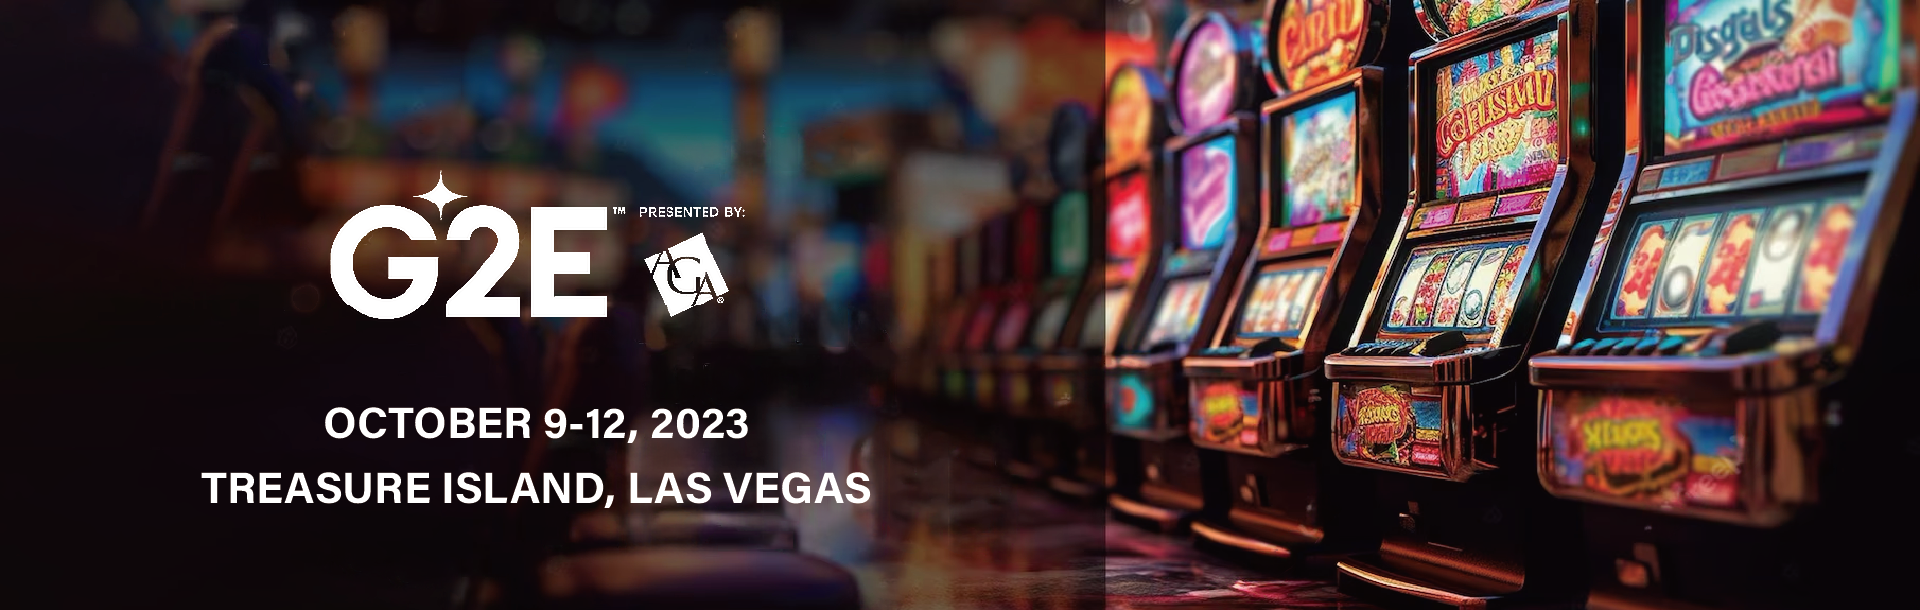 If you want to be in gaming, then G2E in Las Vegas is the place to be.